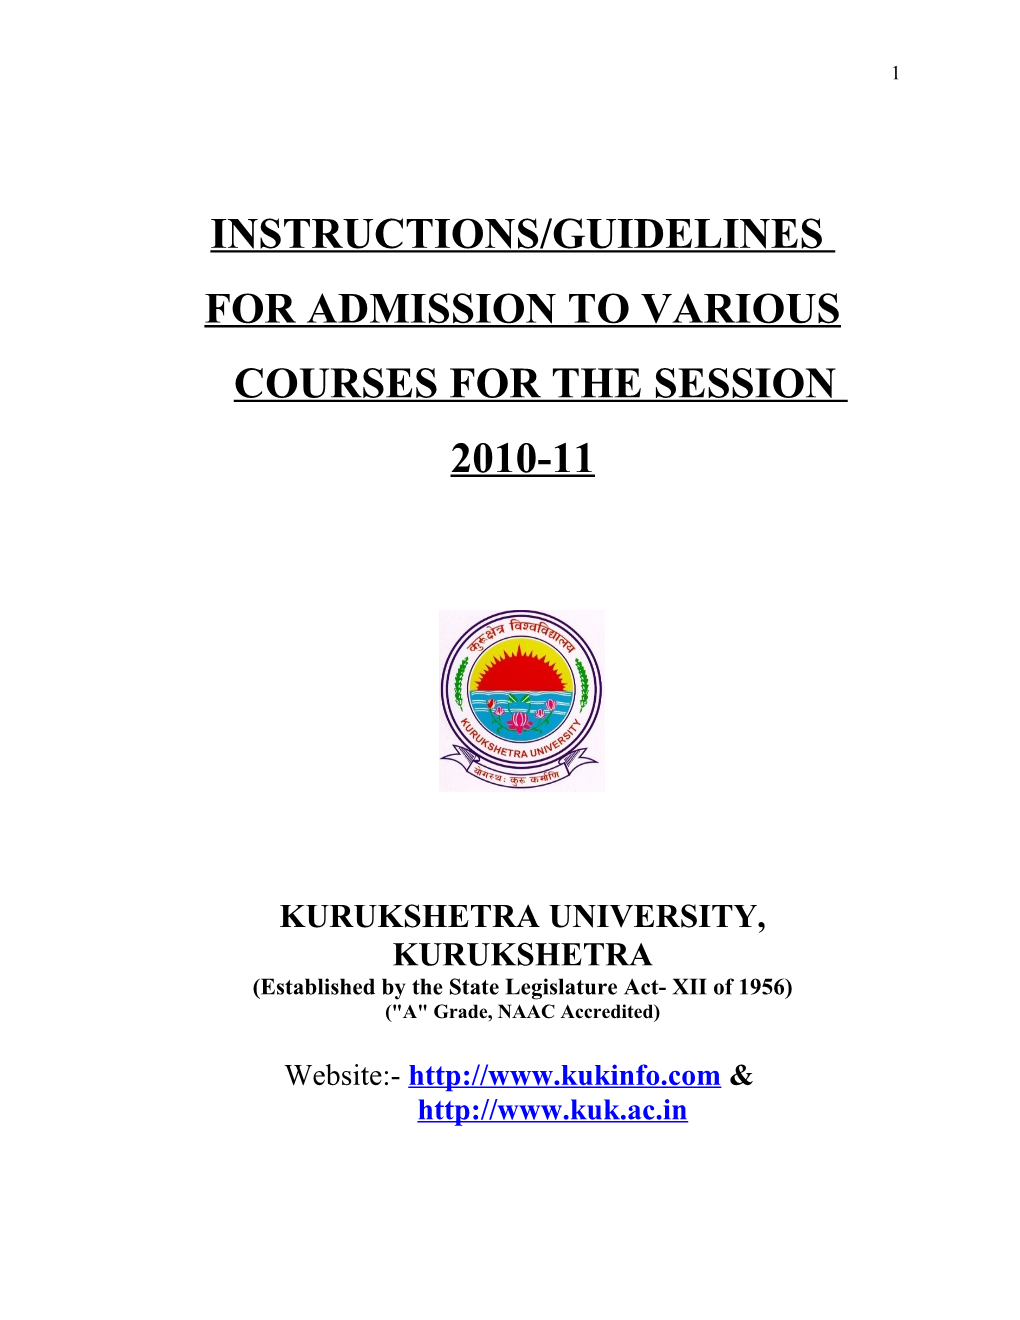 For Admission to Various Courses for the Session